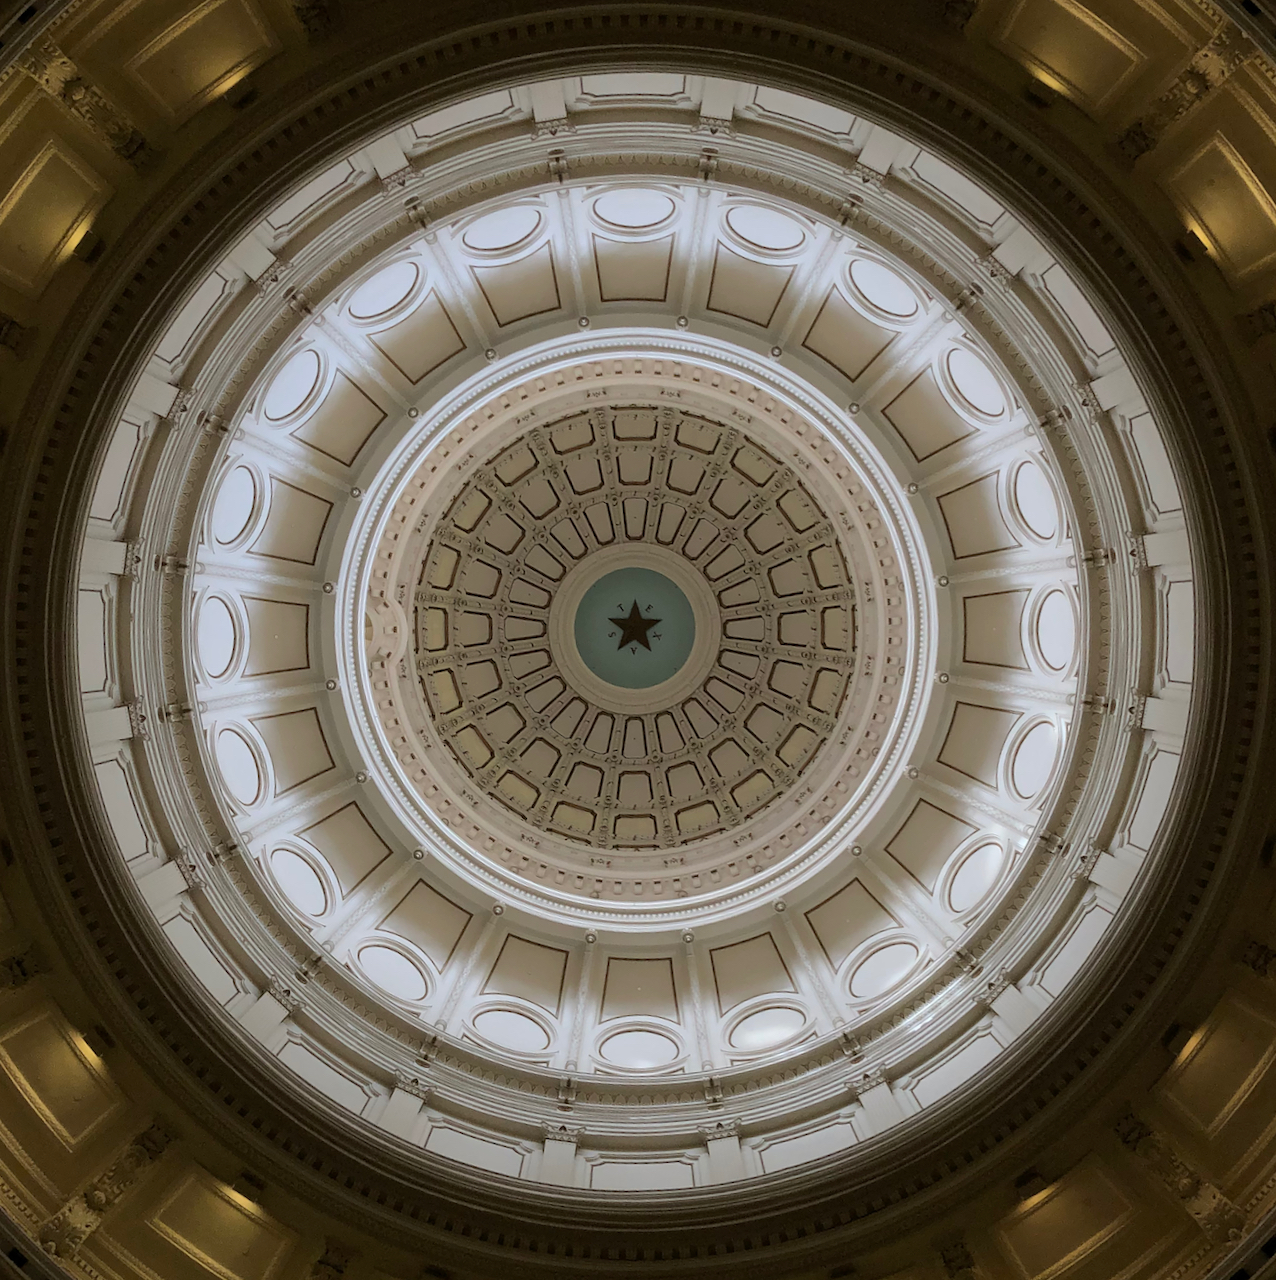 Looking up at the Texas State Capitol rotunda there is a star with the word Texas around it.